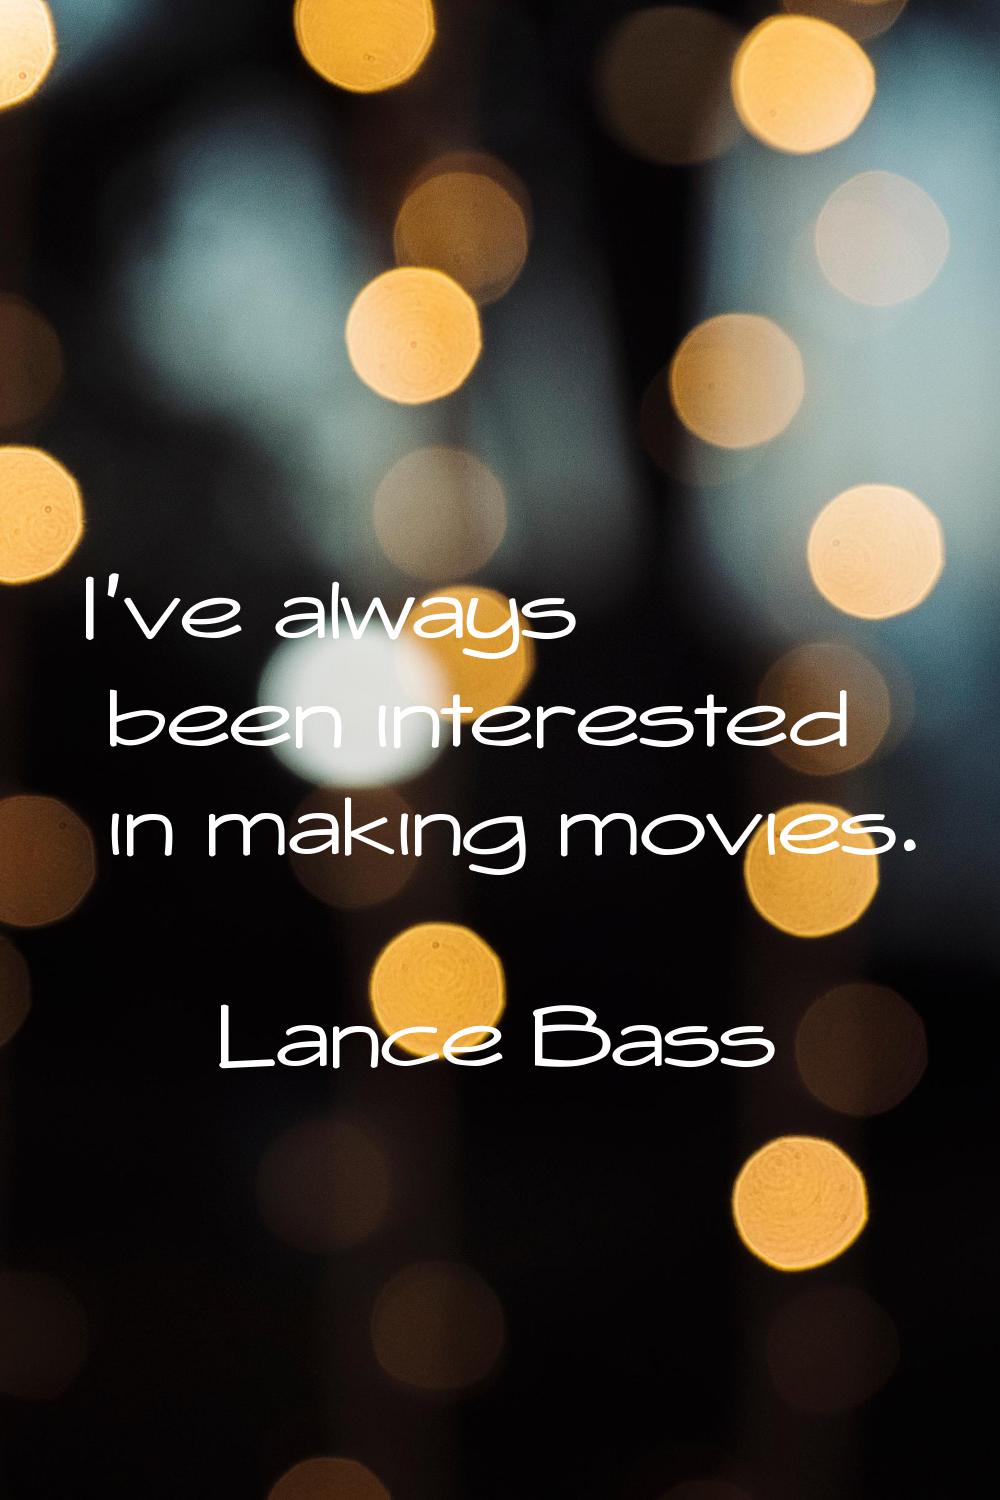 I've always been interested in making movies.